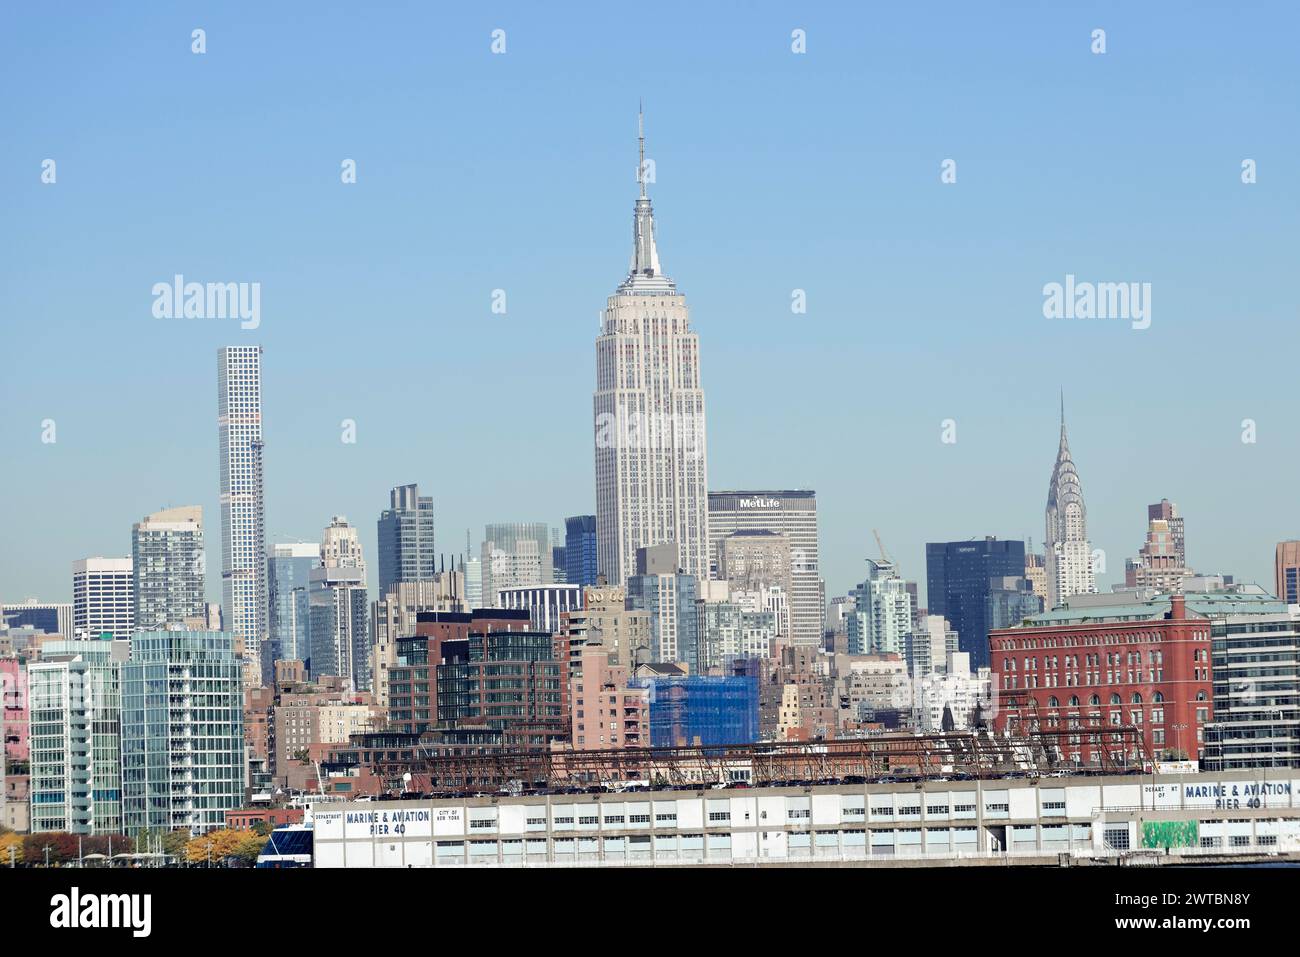 View of the Empire State Building and the surrounding skyscrapers by day, Manhattan, Down Town, New York City, New York, USA, North America Stock Photo